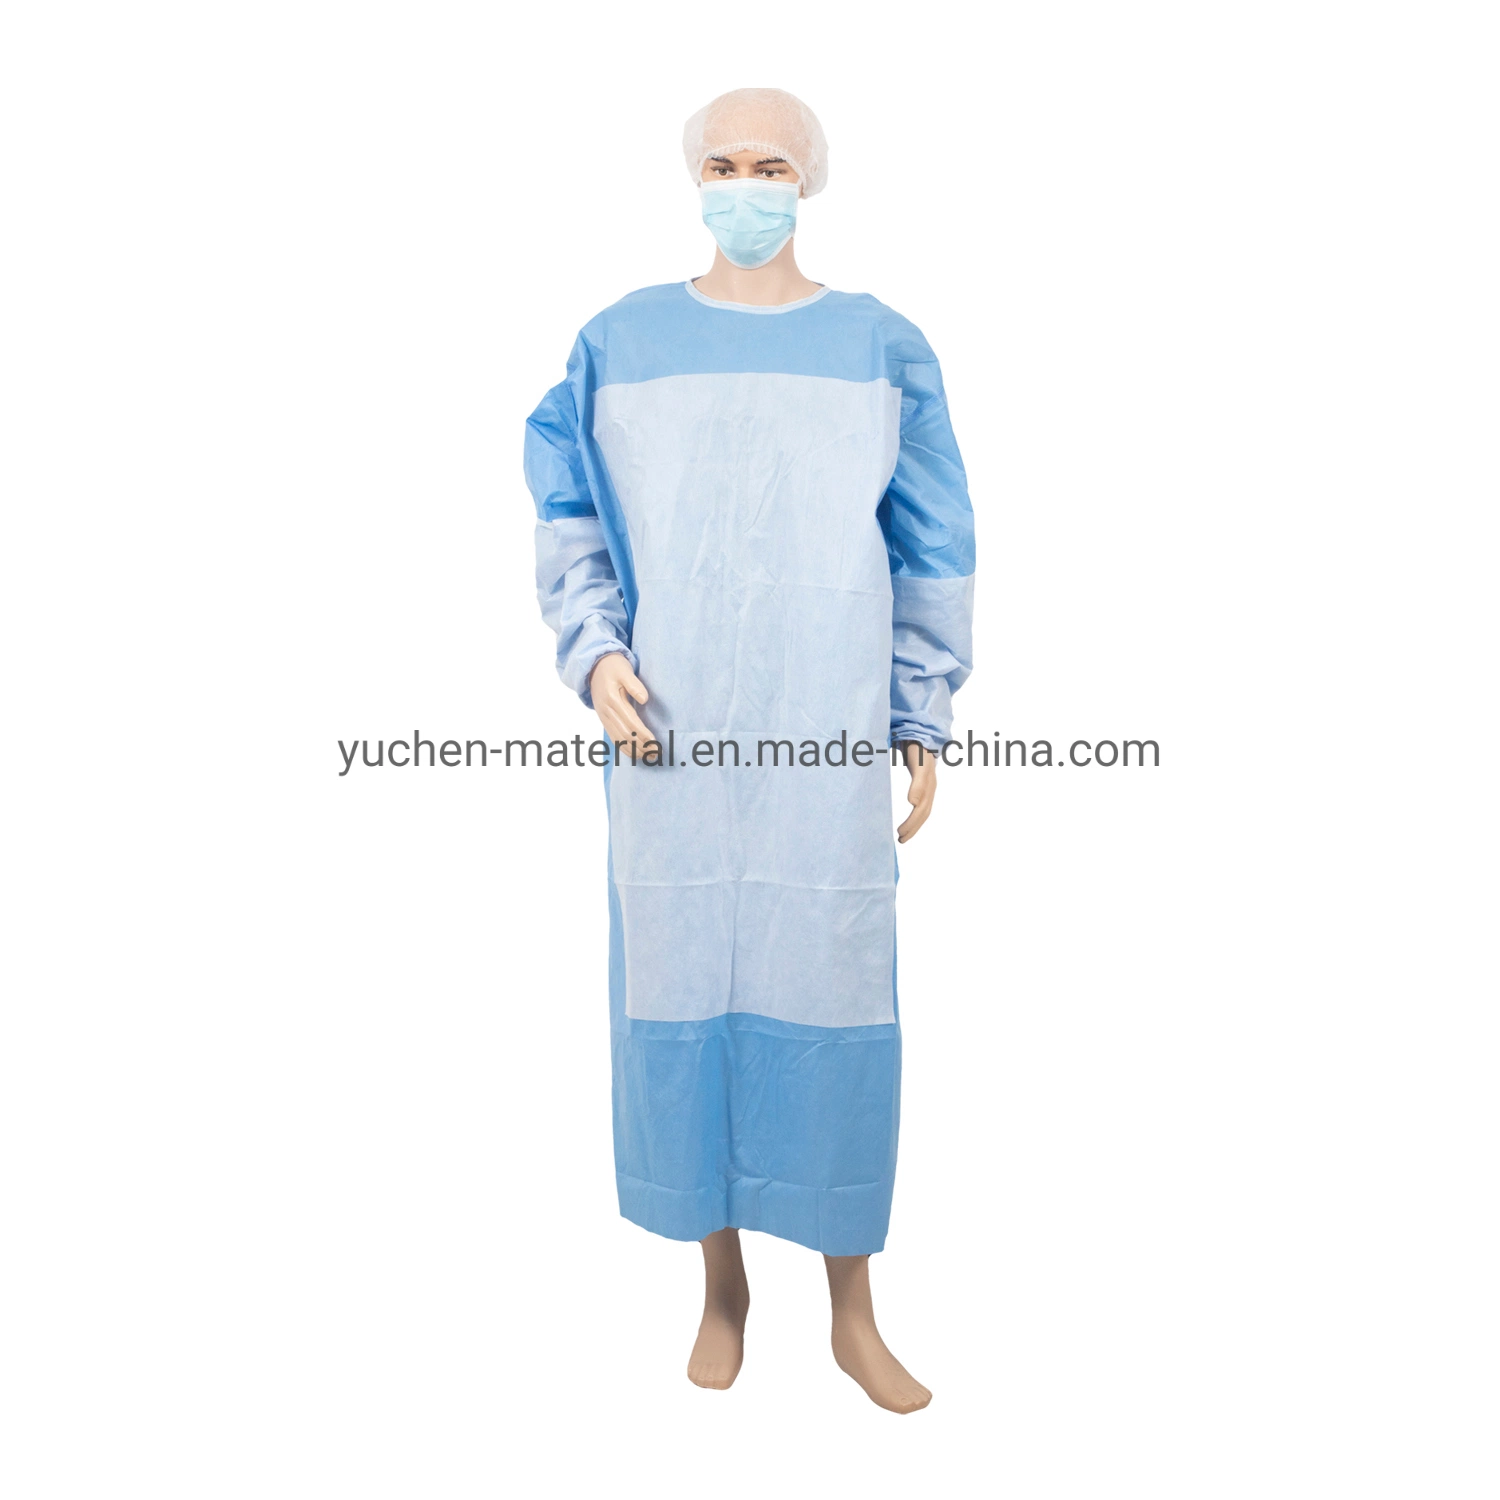 Disposable Medical Gown Standard and Reinforced SMMS 45GSM Surgical Gowns